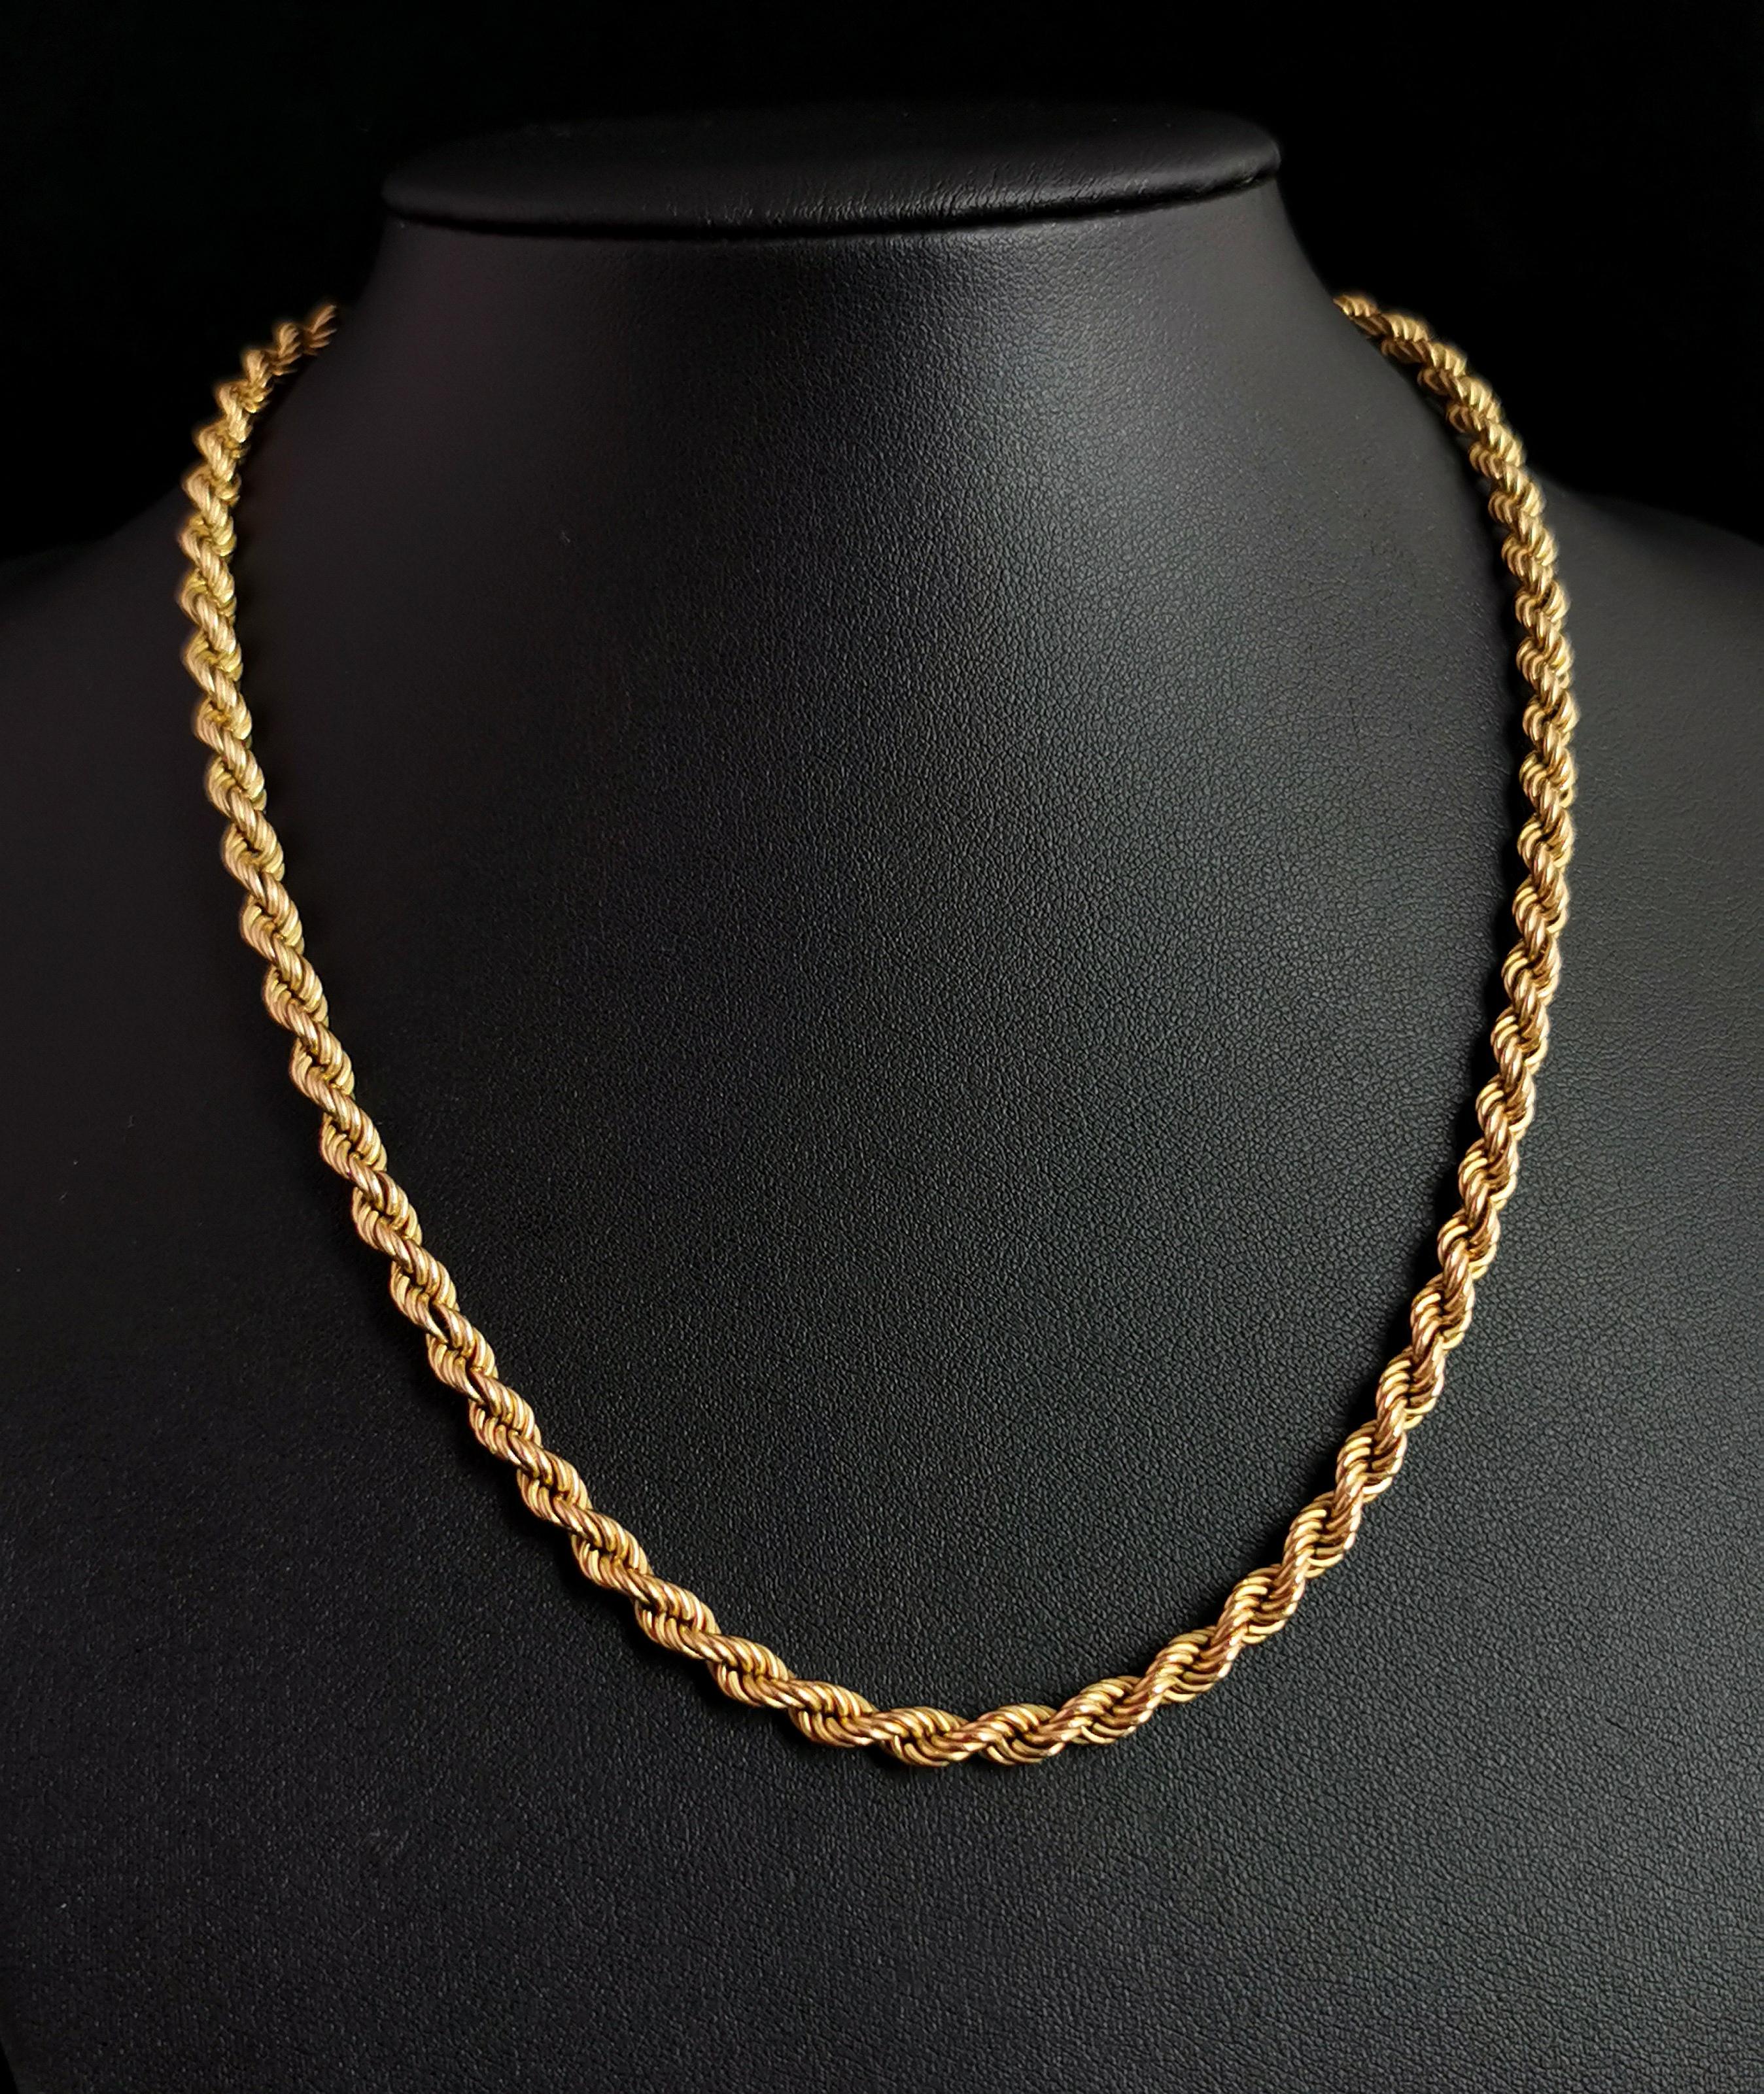 Vintage 9k Yellow Gold Rope Twist Chain Necklace, Italian 4